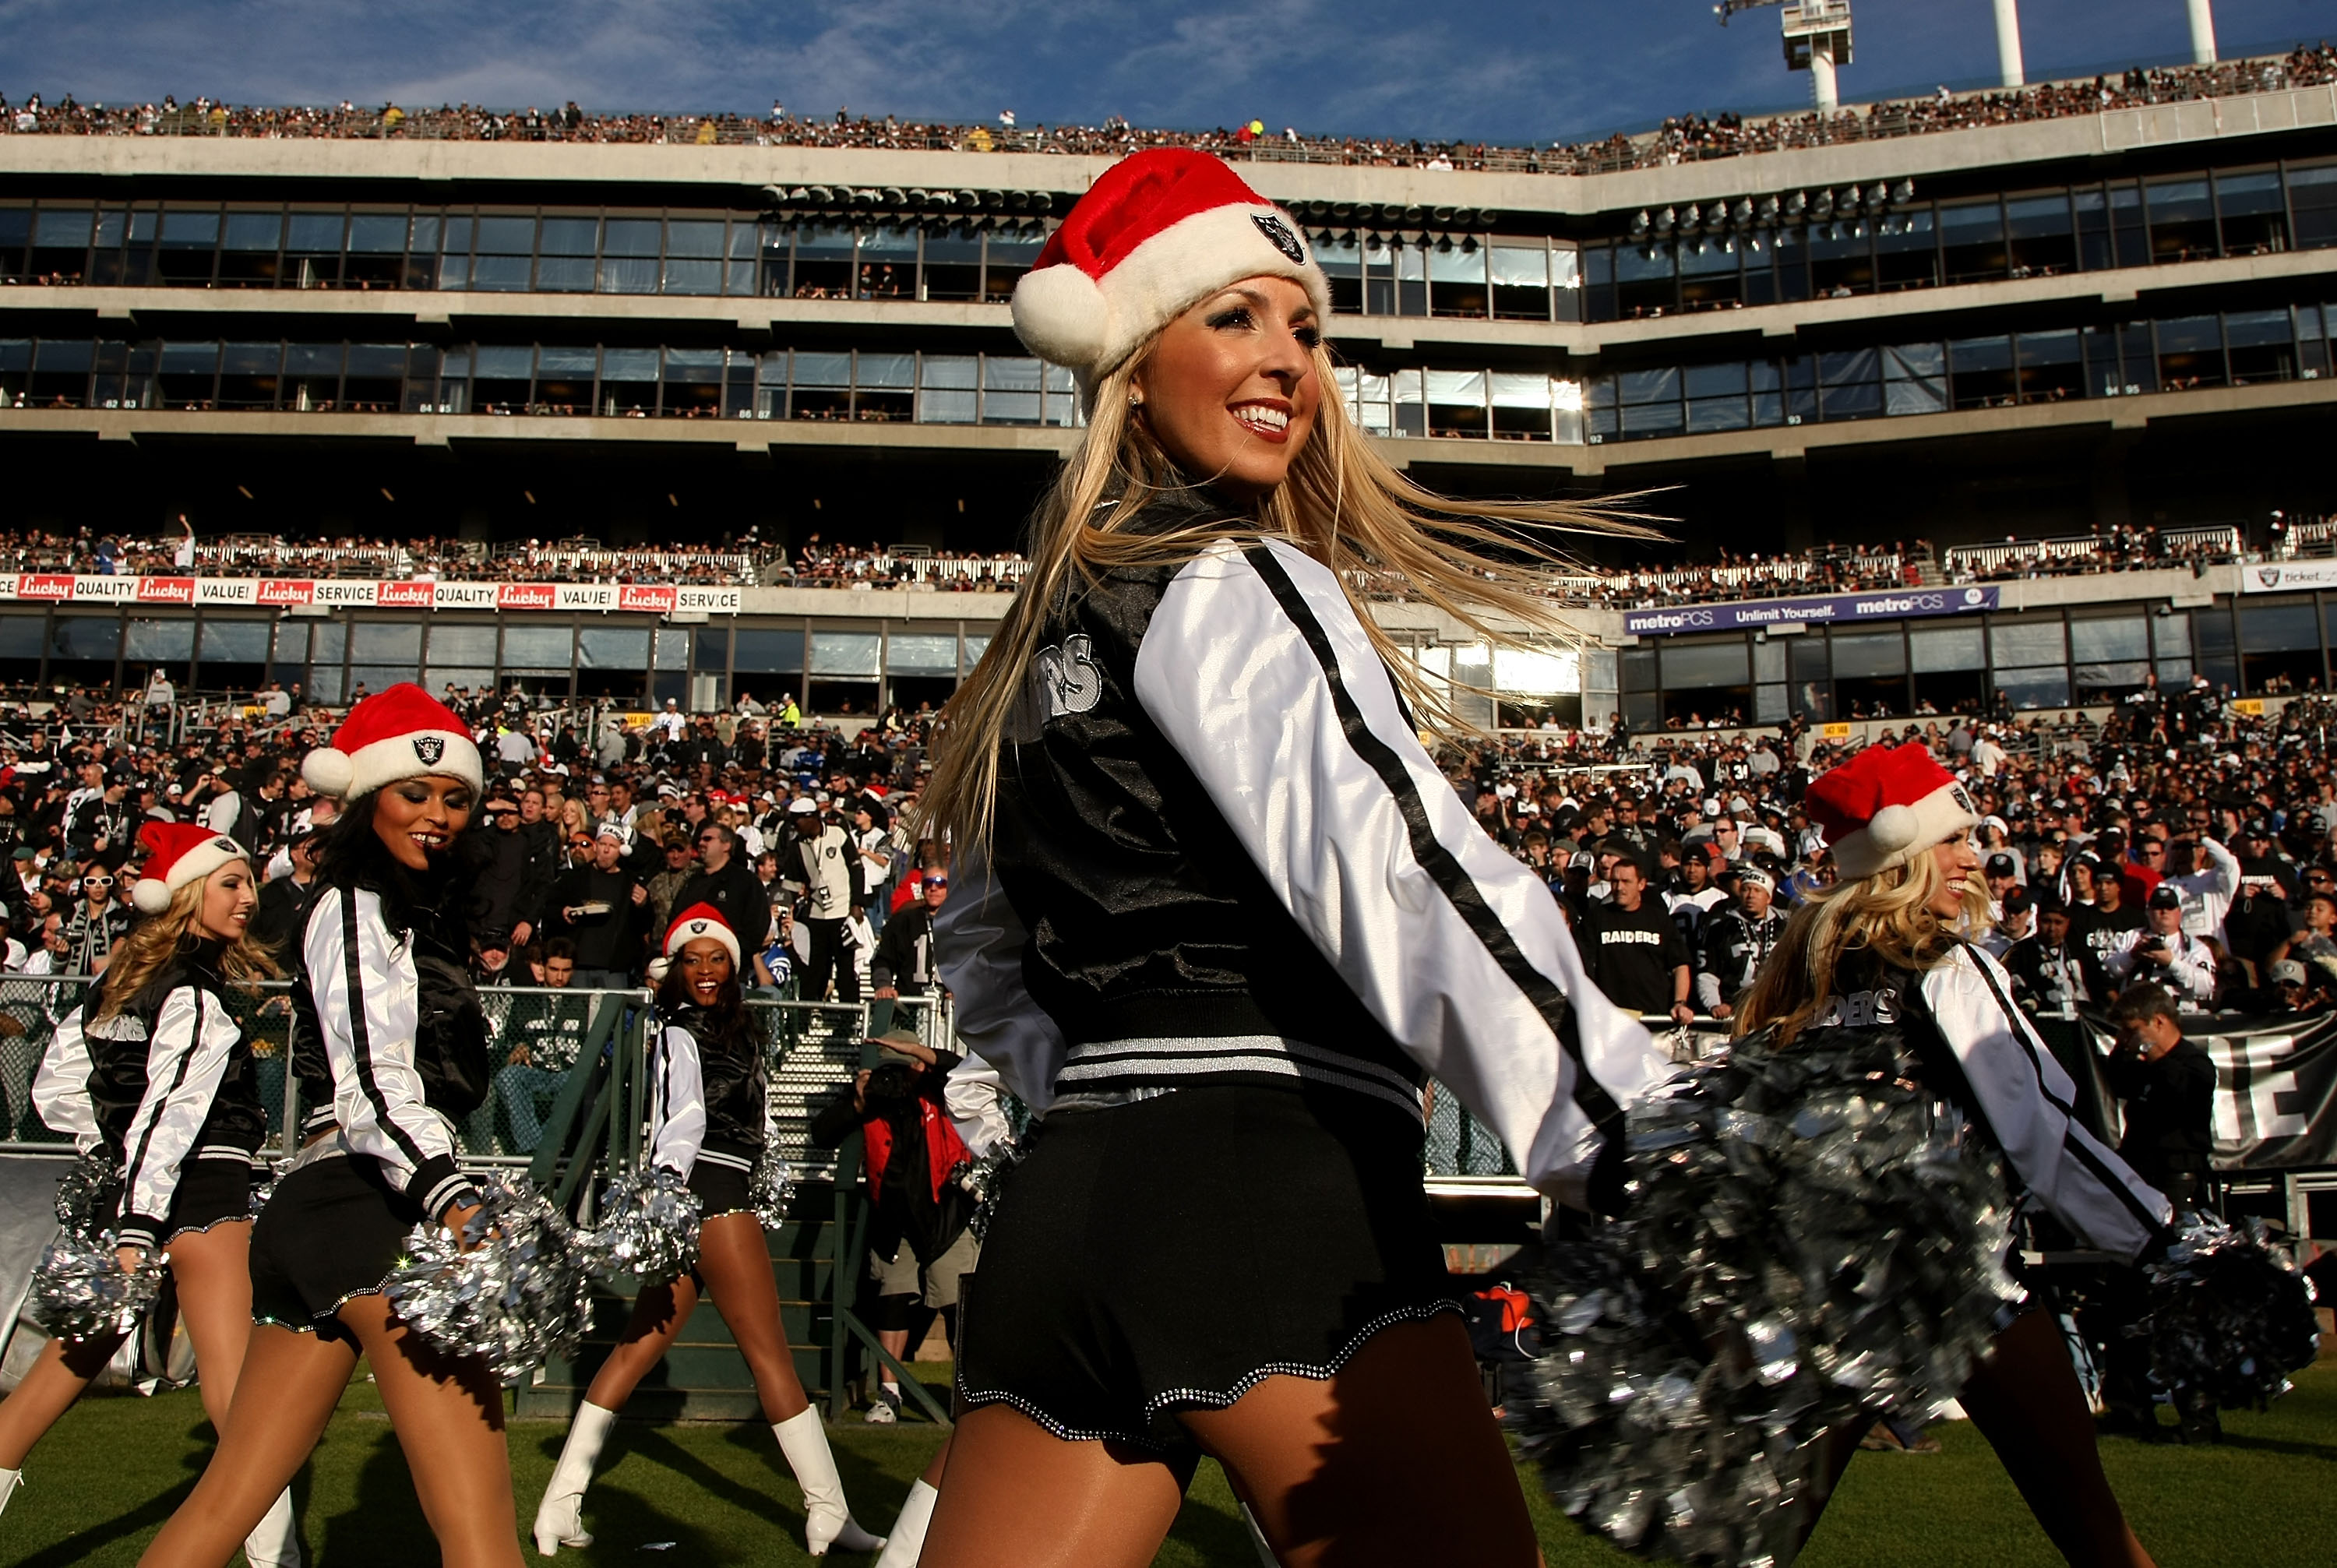 OAKLAND, CA - DECEMBER 16: The Raiderettes perform during the game between the Indianapolis Colts and the Oakland Raiders at McAfee Coliseum December 16, 2007 in Oakland, California. The Colts won 21-14.  (Photo by Stephen Dunn/Getty Images)